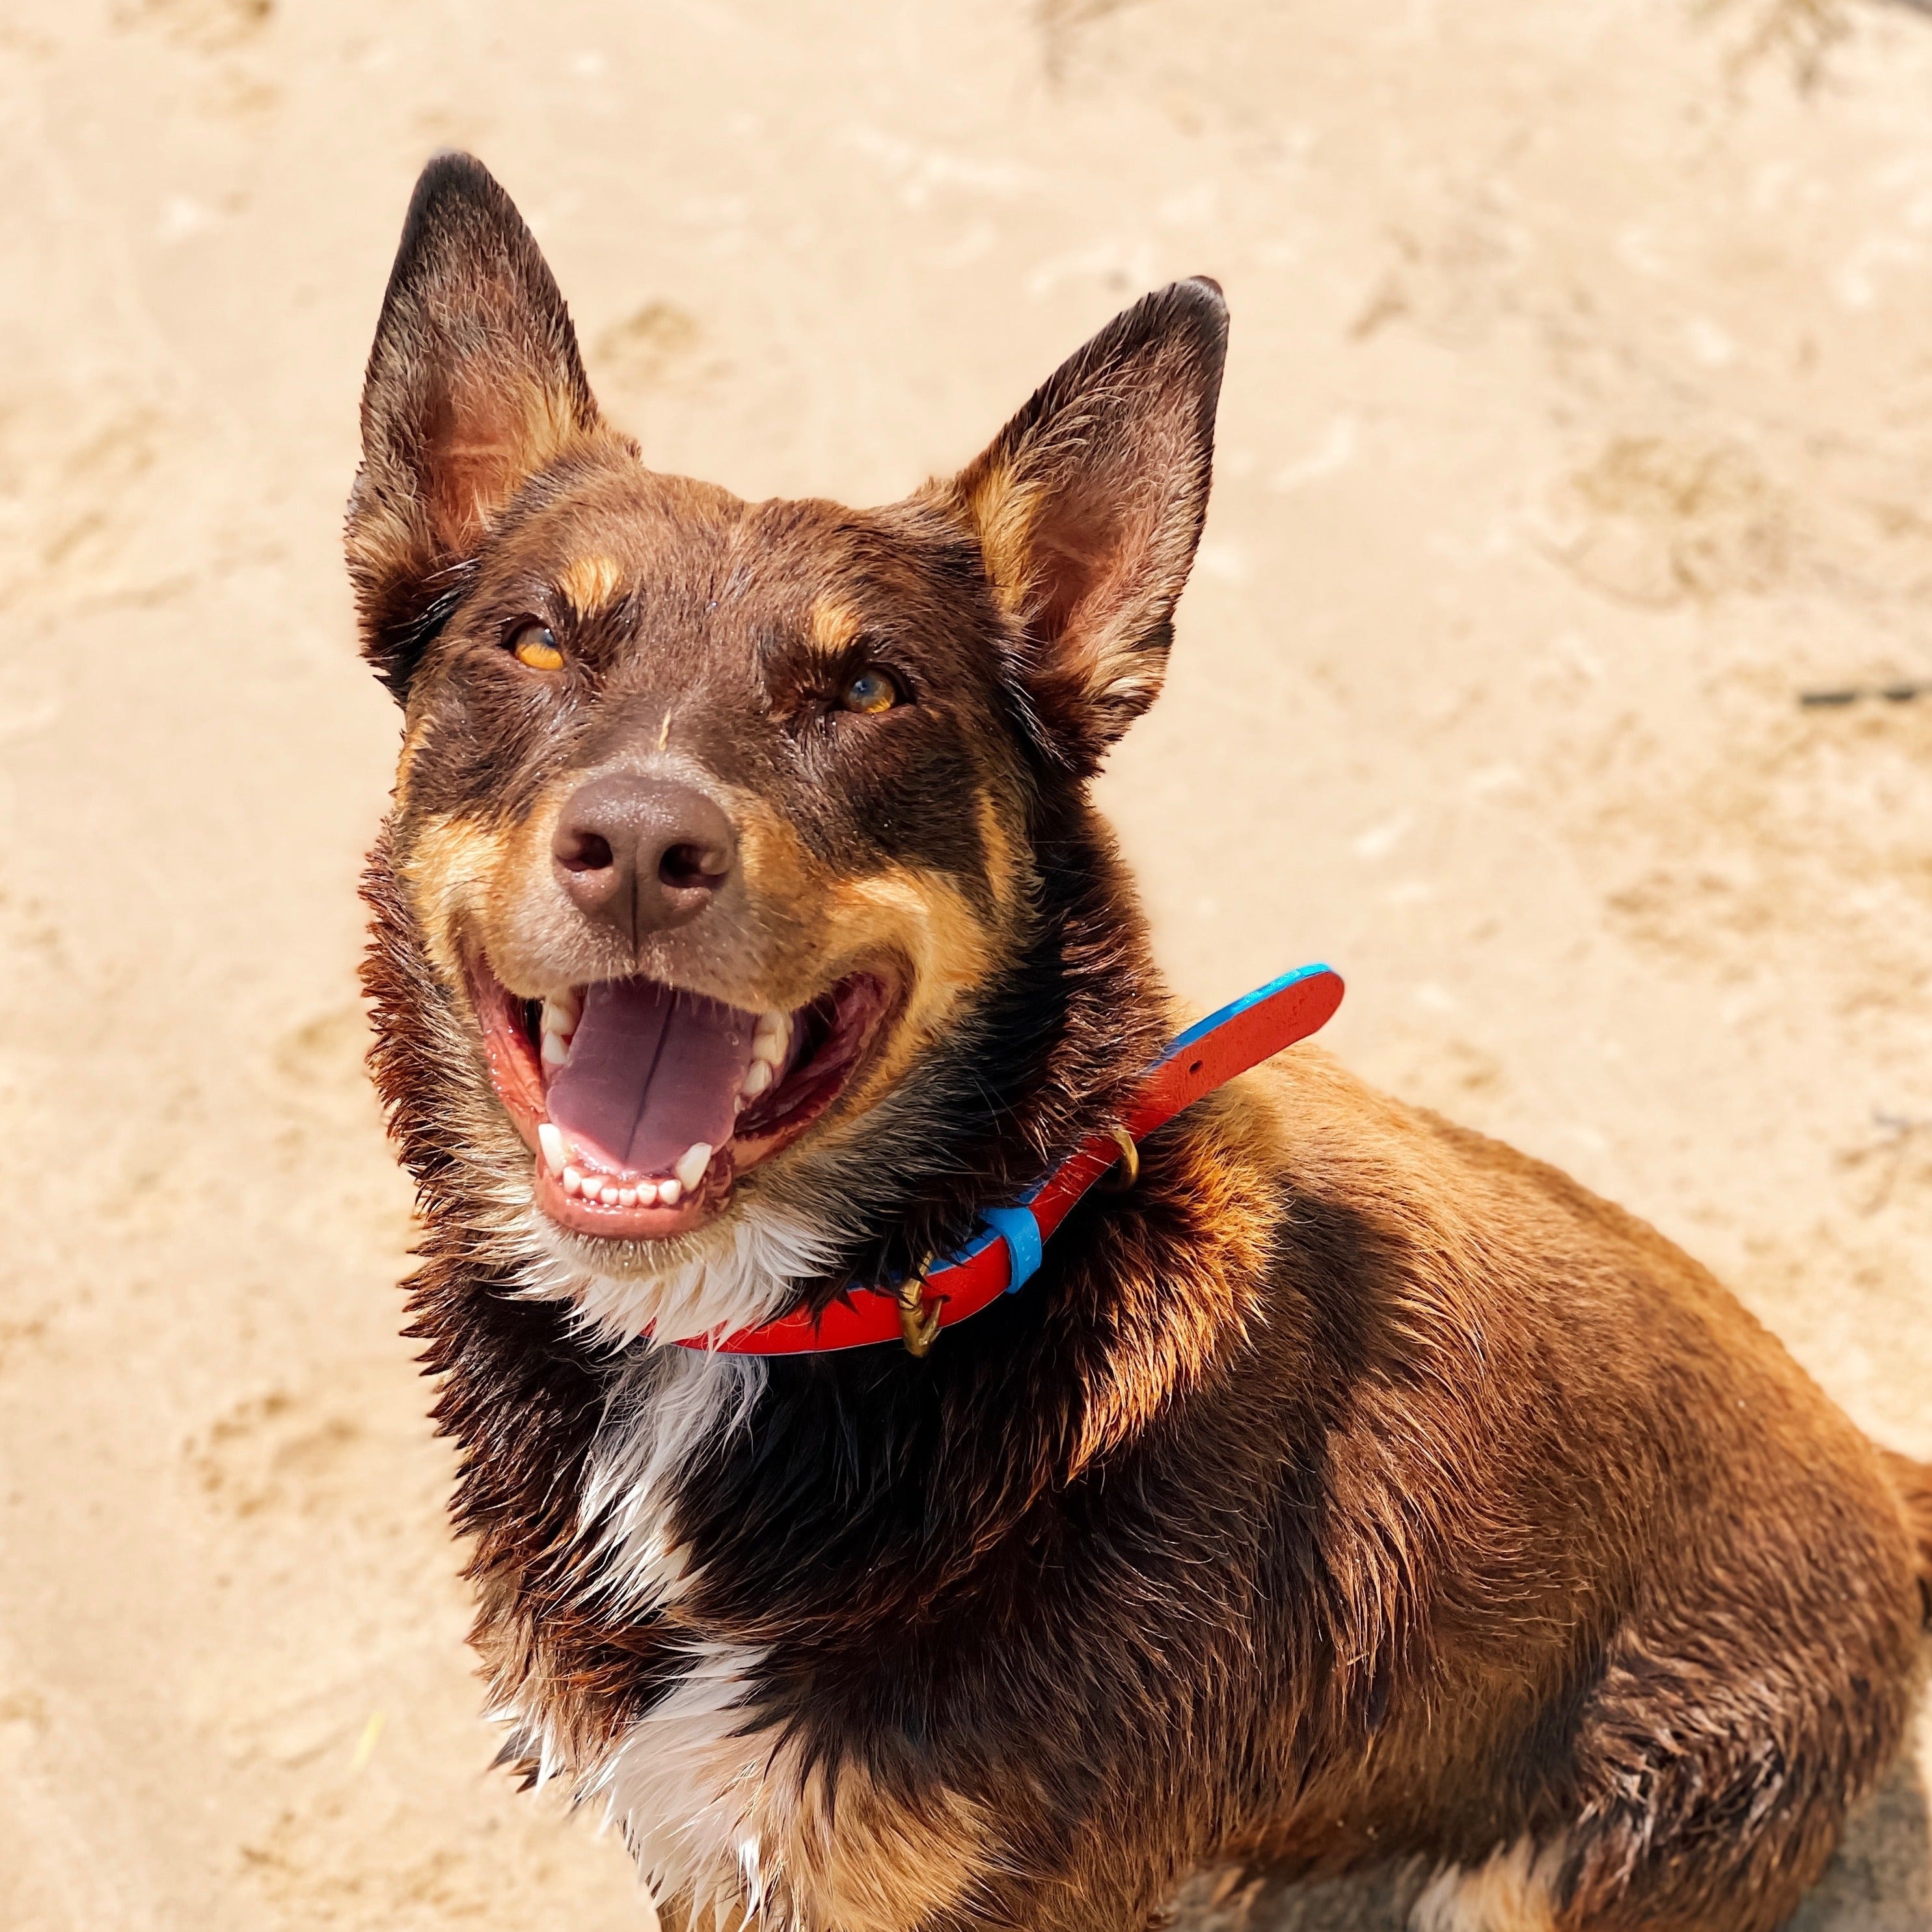 A joyous brown dog with a shiny coat and perked ears sits on the sand, its tongue out in a happy pant, wearing a Georgie Paws red buffalo leather collar with a blue leash, reveling in Jersey - Red + Blue.